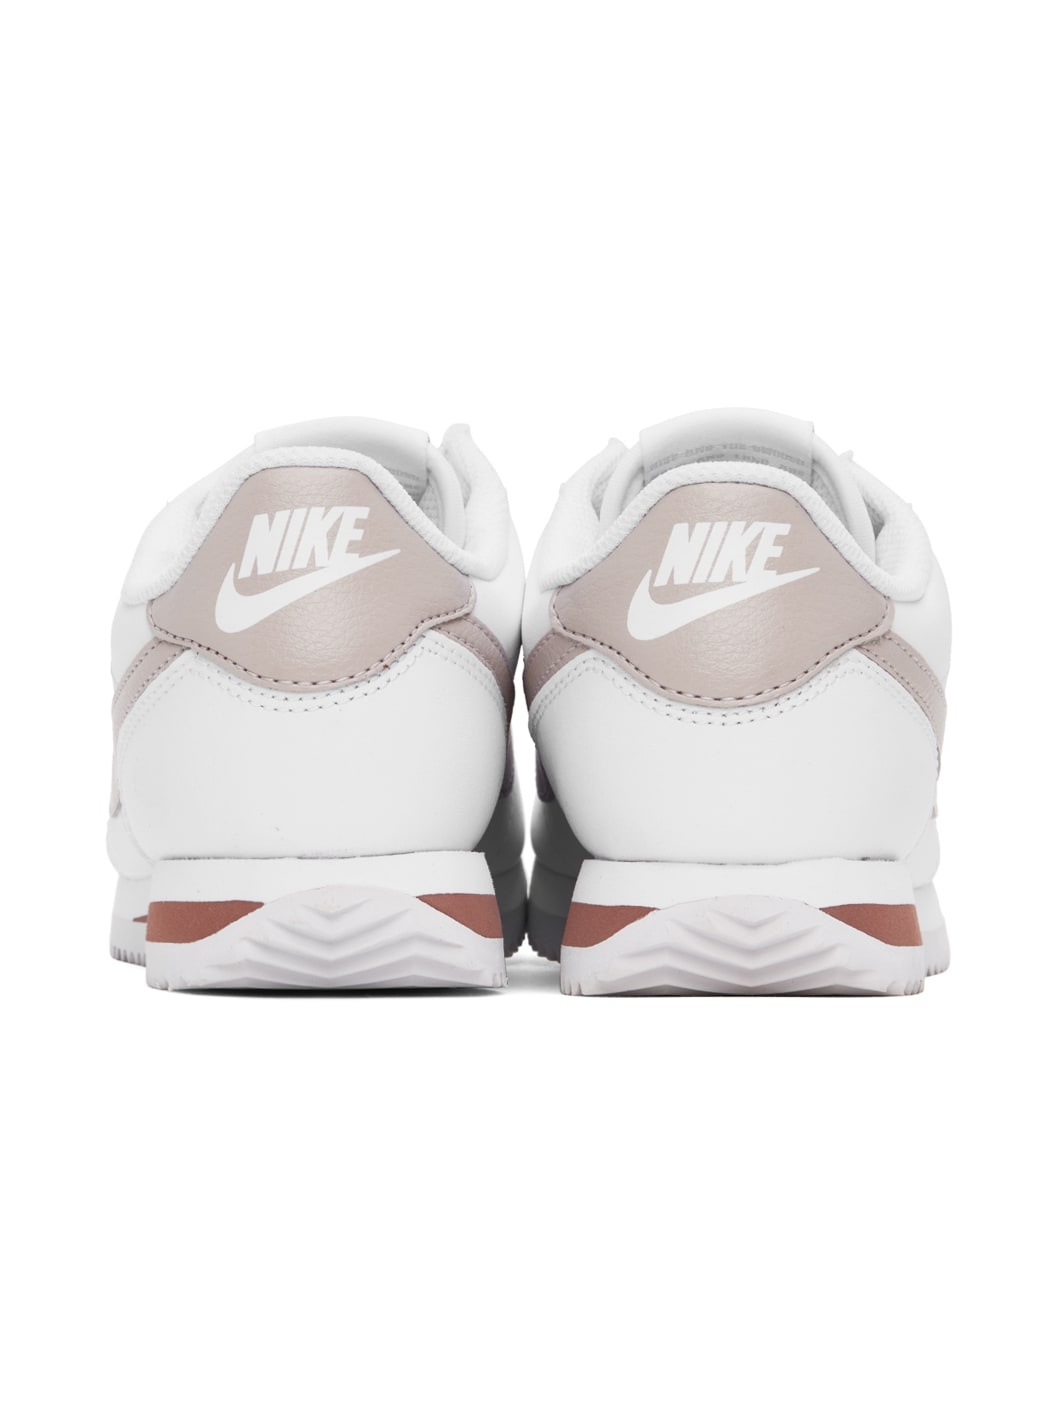 White & Pink Cortez Sneakers - 2